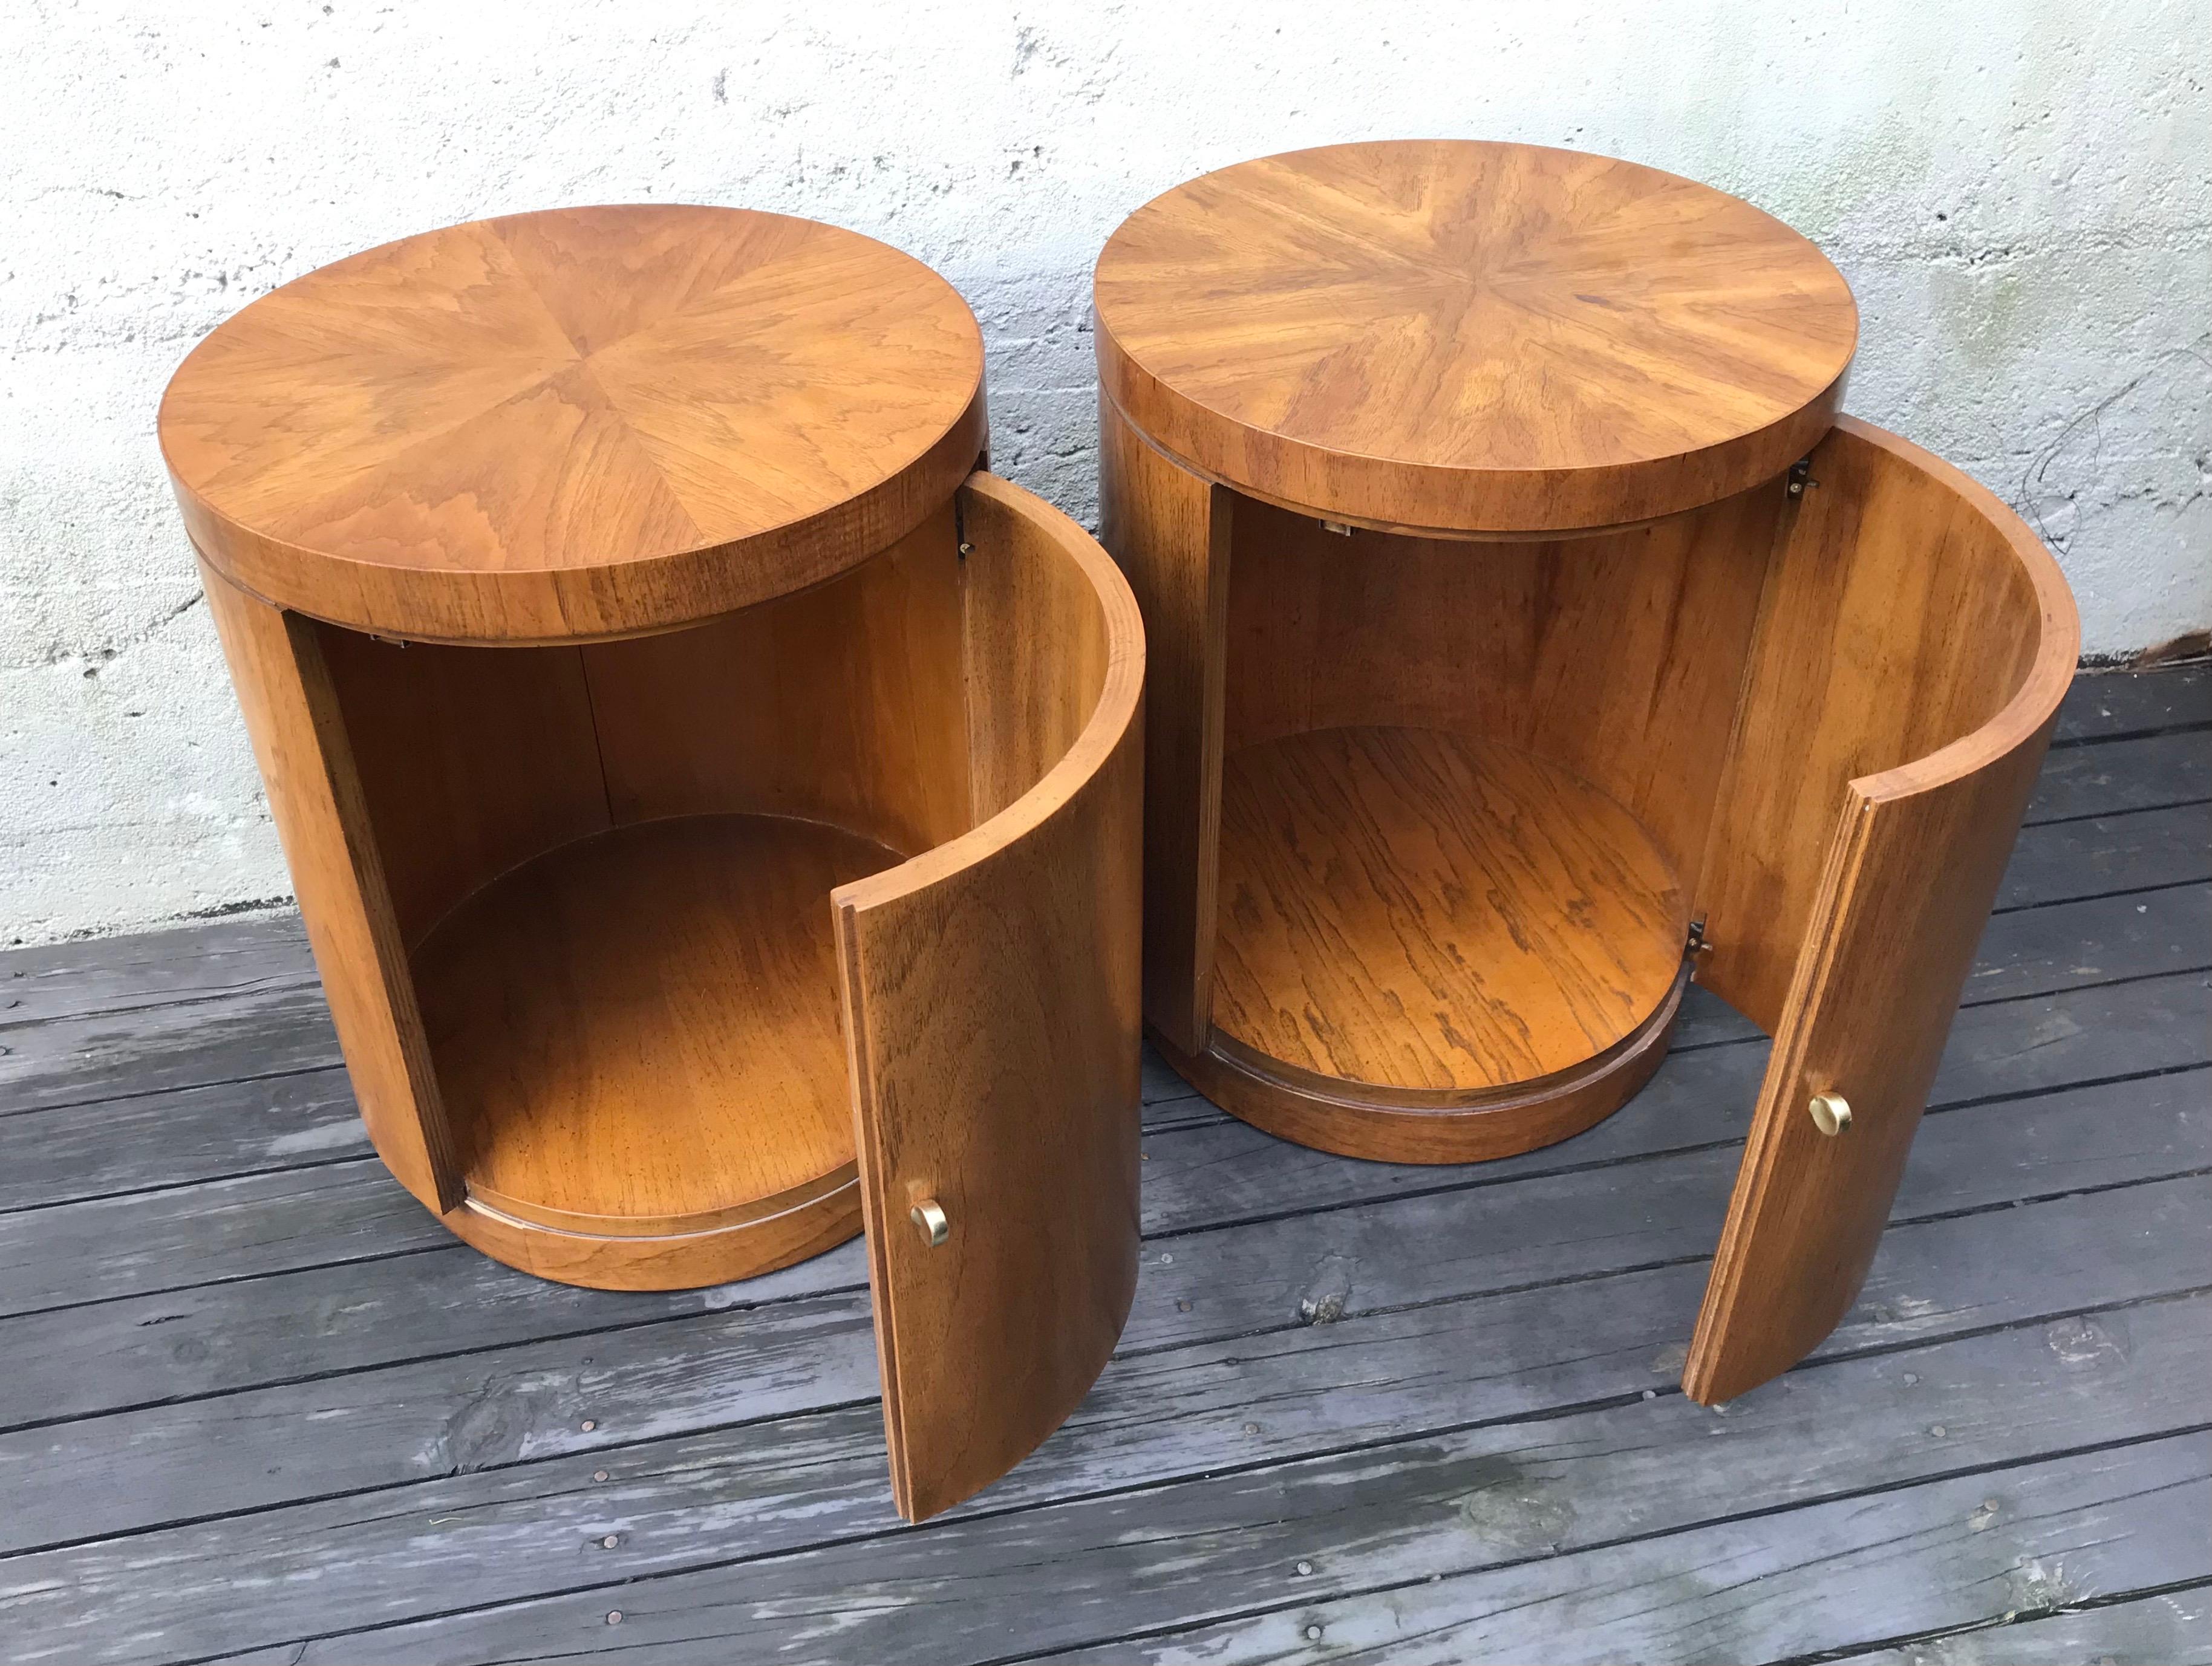 Wood Pair of Mid-Century Modern Tubular Round Side Tables by Drexel